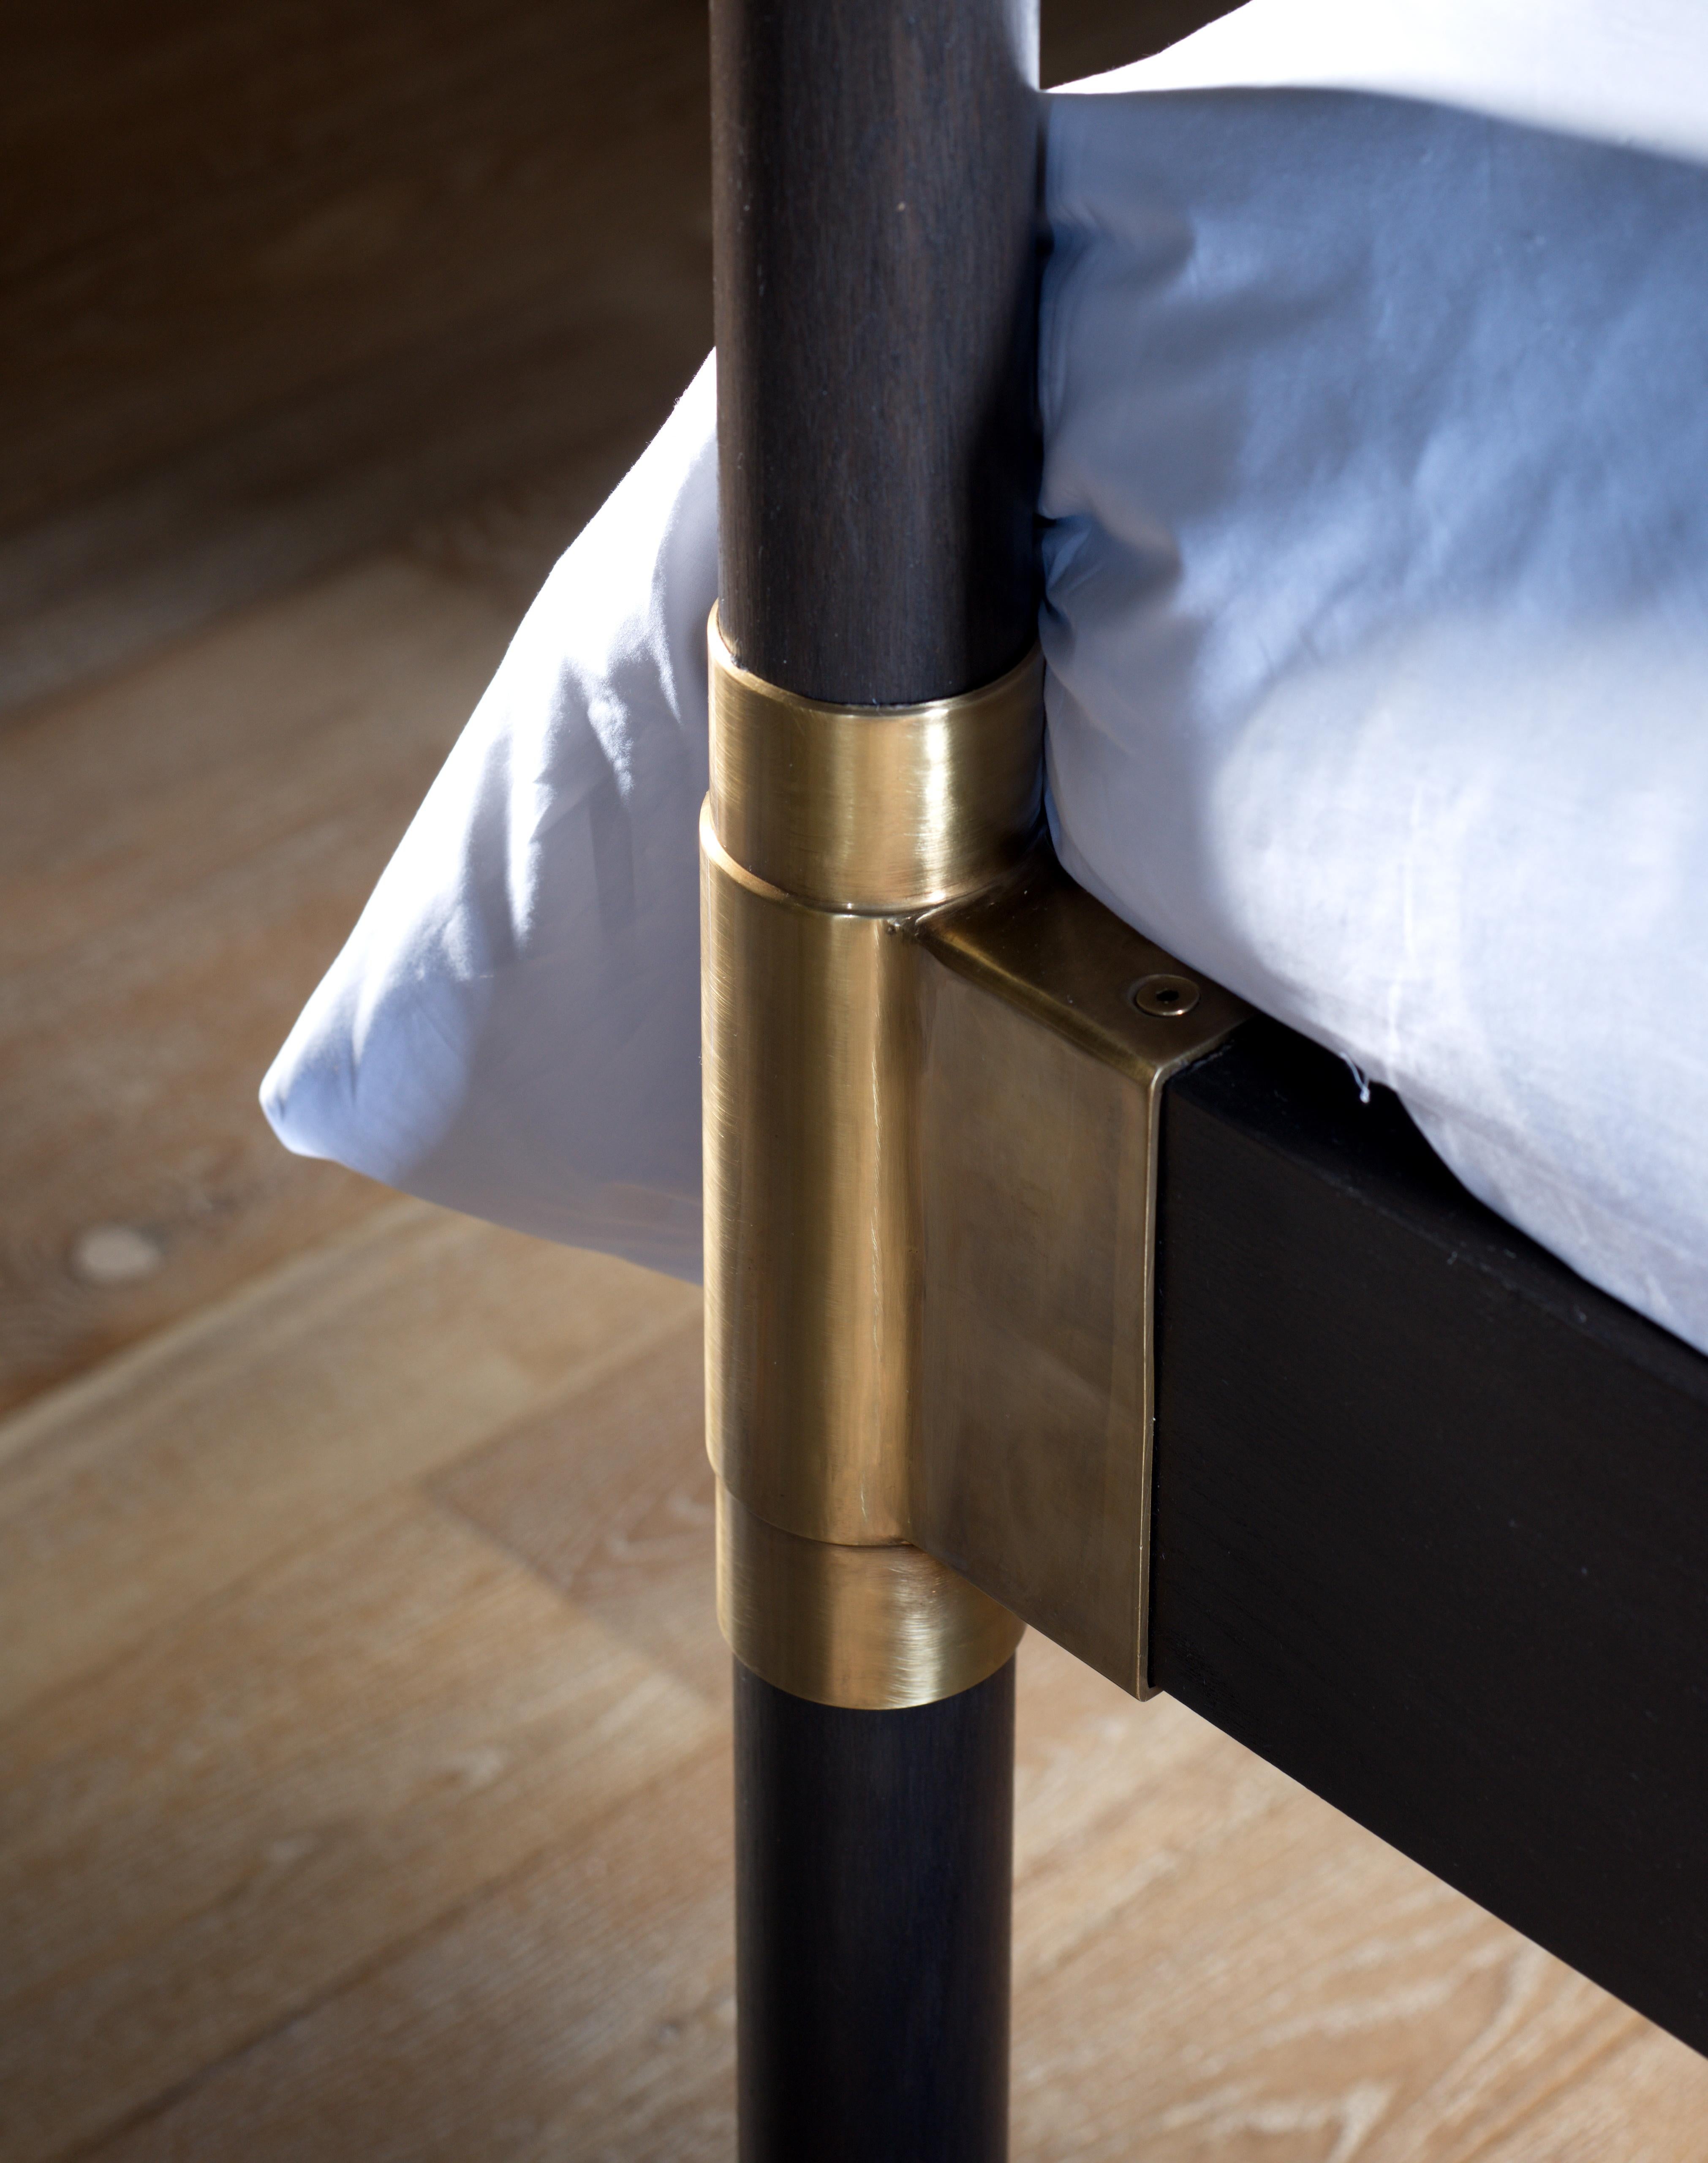 brass four poster bed